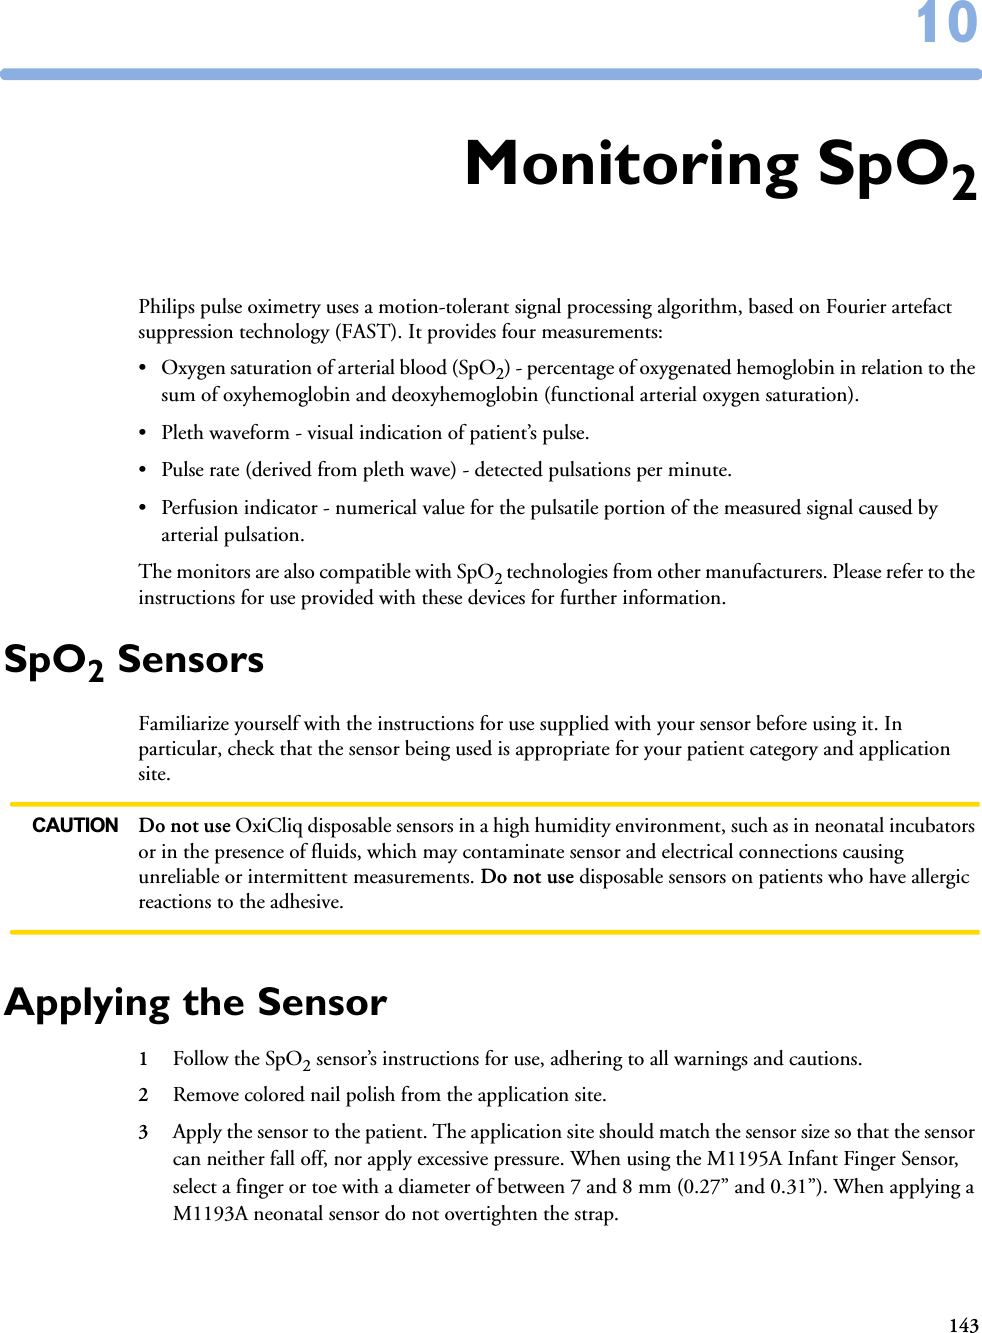 1431010Monitoring SpO2Philips pulse oximetry uses a motion-tolerant signal processing algorithm, based on Fourier artefact suppression technology (FAST). It provides four measurements:• Oxygen saturation of arterial blood (SpO2) - percentage of oxygenated hemoglobin in relation to the sum of oxyhemoglobin and deoxyhemoglobin (functional arterial oxygen saturation).• Pleth waveform - visual indication of patient’s pulse.• Pulse rate (derived from pleth wave) - detected pulsations per minute.• Perfusion indicator - numerical value for the pulsatile portion of the measured signal caused by arterial pulsation.The monitors are also compatible with SpO2 technologies from other manufacturers. Please refer to the instructions for use provided with these devices for further information. SpO2 SensorsFamiliarize yourself with the instructions for use supplied with your sensor before using it. In particular, check that the sensor being used is appropriate for your patient category and application site.CAUTION Do not use OxiCliq disposable sensors in a high humidity environment, such as in neonatal incubators or in the presence of fluids, which may contaminate sensor and electrical connections causing unreliable or intermittent measurements. Do not use disposable sensors on patients who have allergic reactions to the adhesive. Applying the Sensor1Follow the SpO2 sensor’s instructions for use, adhering to all warnings and cautions.2Remove colored nail polish from the application site.3Apply the sensor to the patient. The application site should match the sensor size so that the sensor can neither fall off, nor apply excessive pressure. When using the M1195A Infant Finger Sensor, select a finger or toe with a diameter of between 7 and 8 mm (0.27” and 0.31”). When applying a M1193A neonatal sensor do not overtighten the strap.